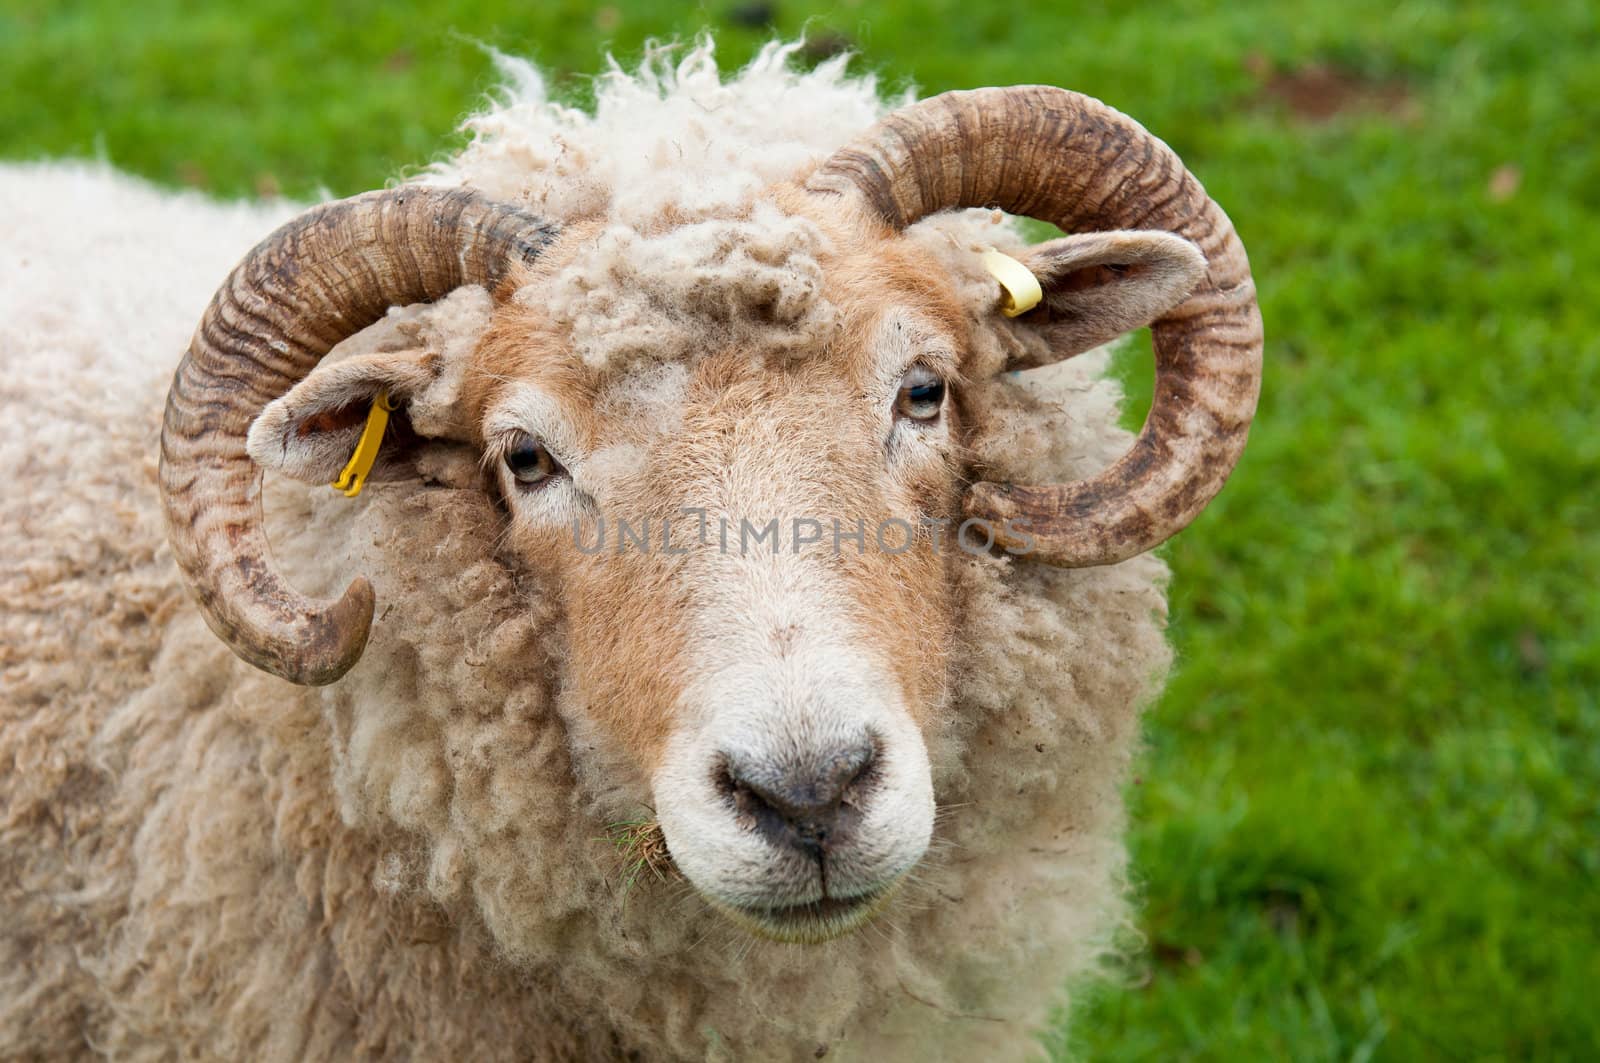 Sheep with horns by luissantos84